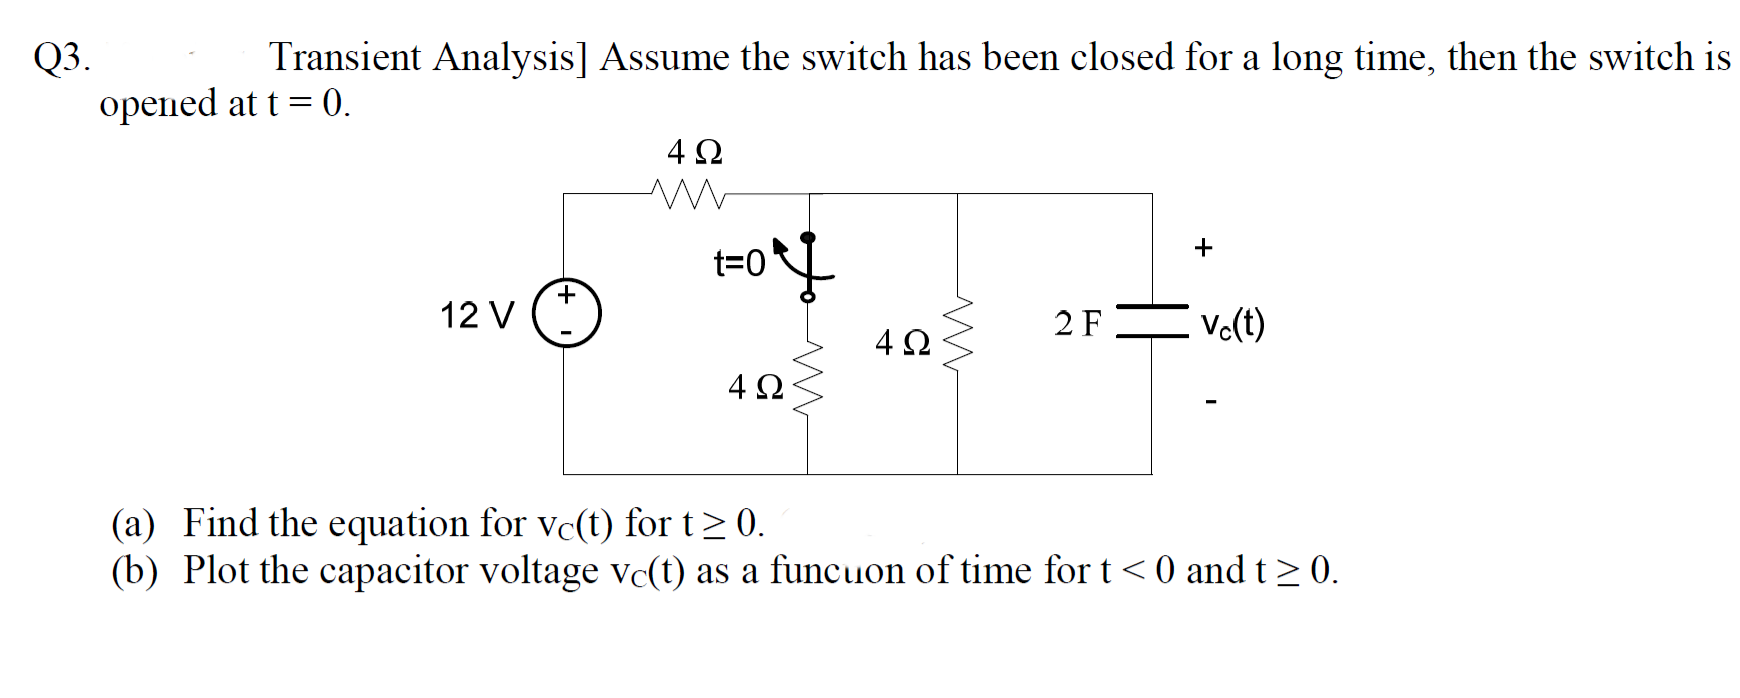 Q3.
opened at t = 0.
Transient Analysis] Assume the switch has been closed for a long time, then the switch is
4Ω
+
t=0
12 V
2 FE Vo(t)
4Ω
(a) Find the equation for vc(t) for t> 0.
(b) Plot the capacitor voltage vc(t) as a funcuon of time for t< 0 and t> 0.
4.
